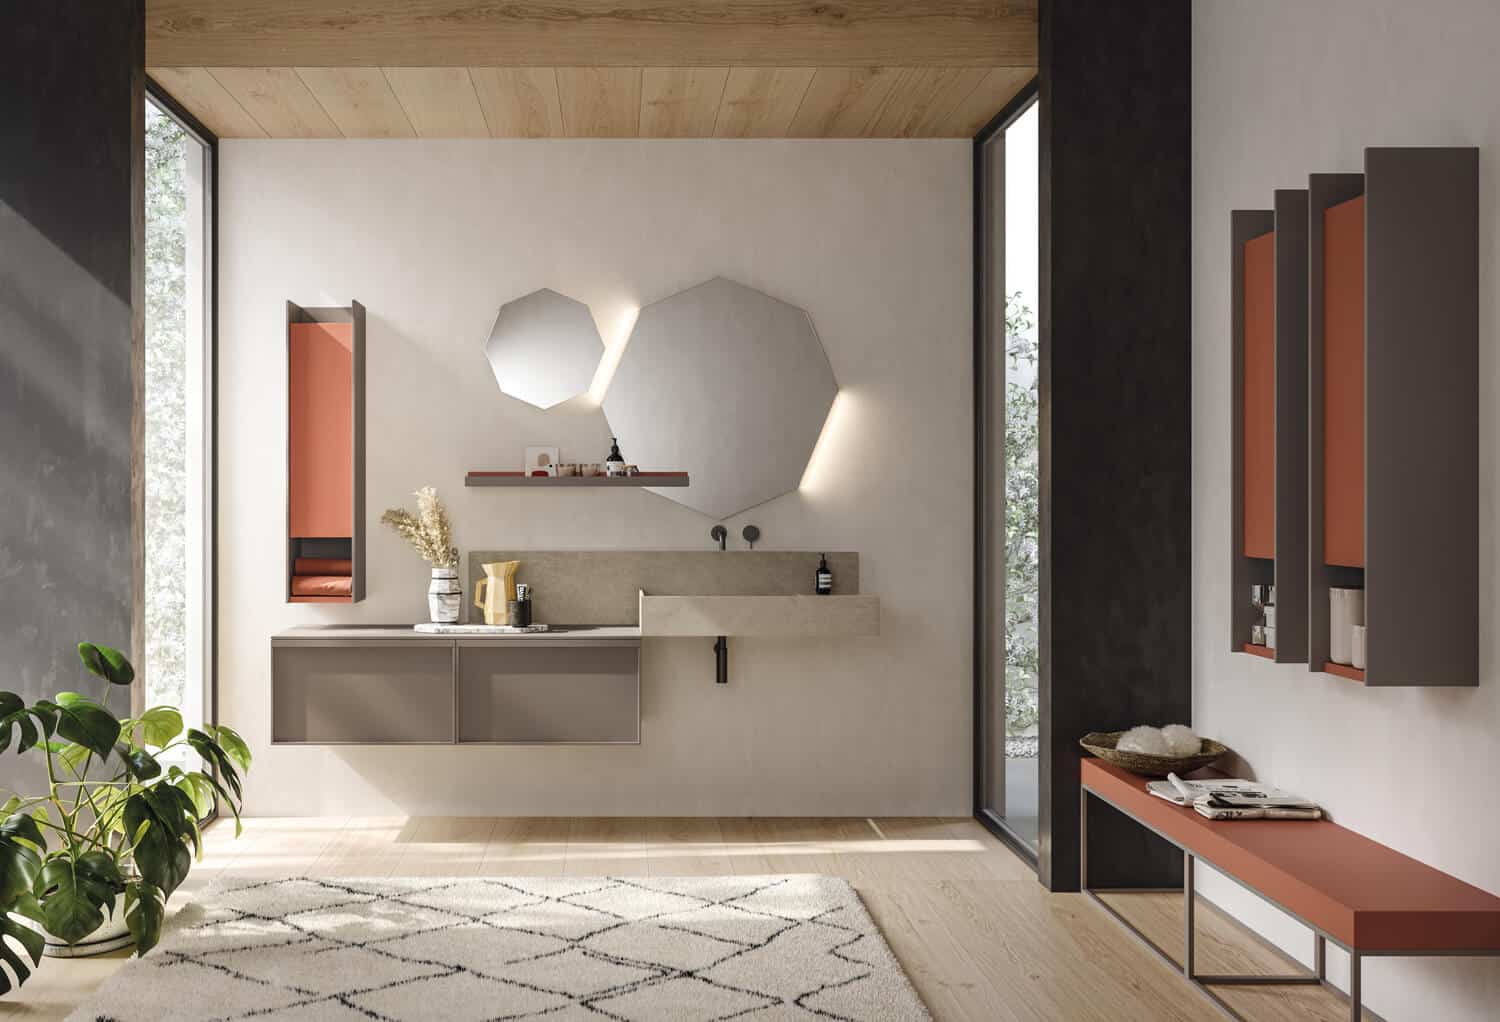 Creative D’ART bathroom design with framed vanities in Tortora matte lacquer. Square washbasin and lip in Grigio Chiaro cement. Tall columns, bench, and shelf match the finish of the vanities and pair it with Terracotta matte lacquer for a fun contrast.  